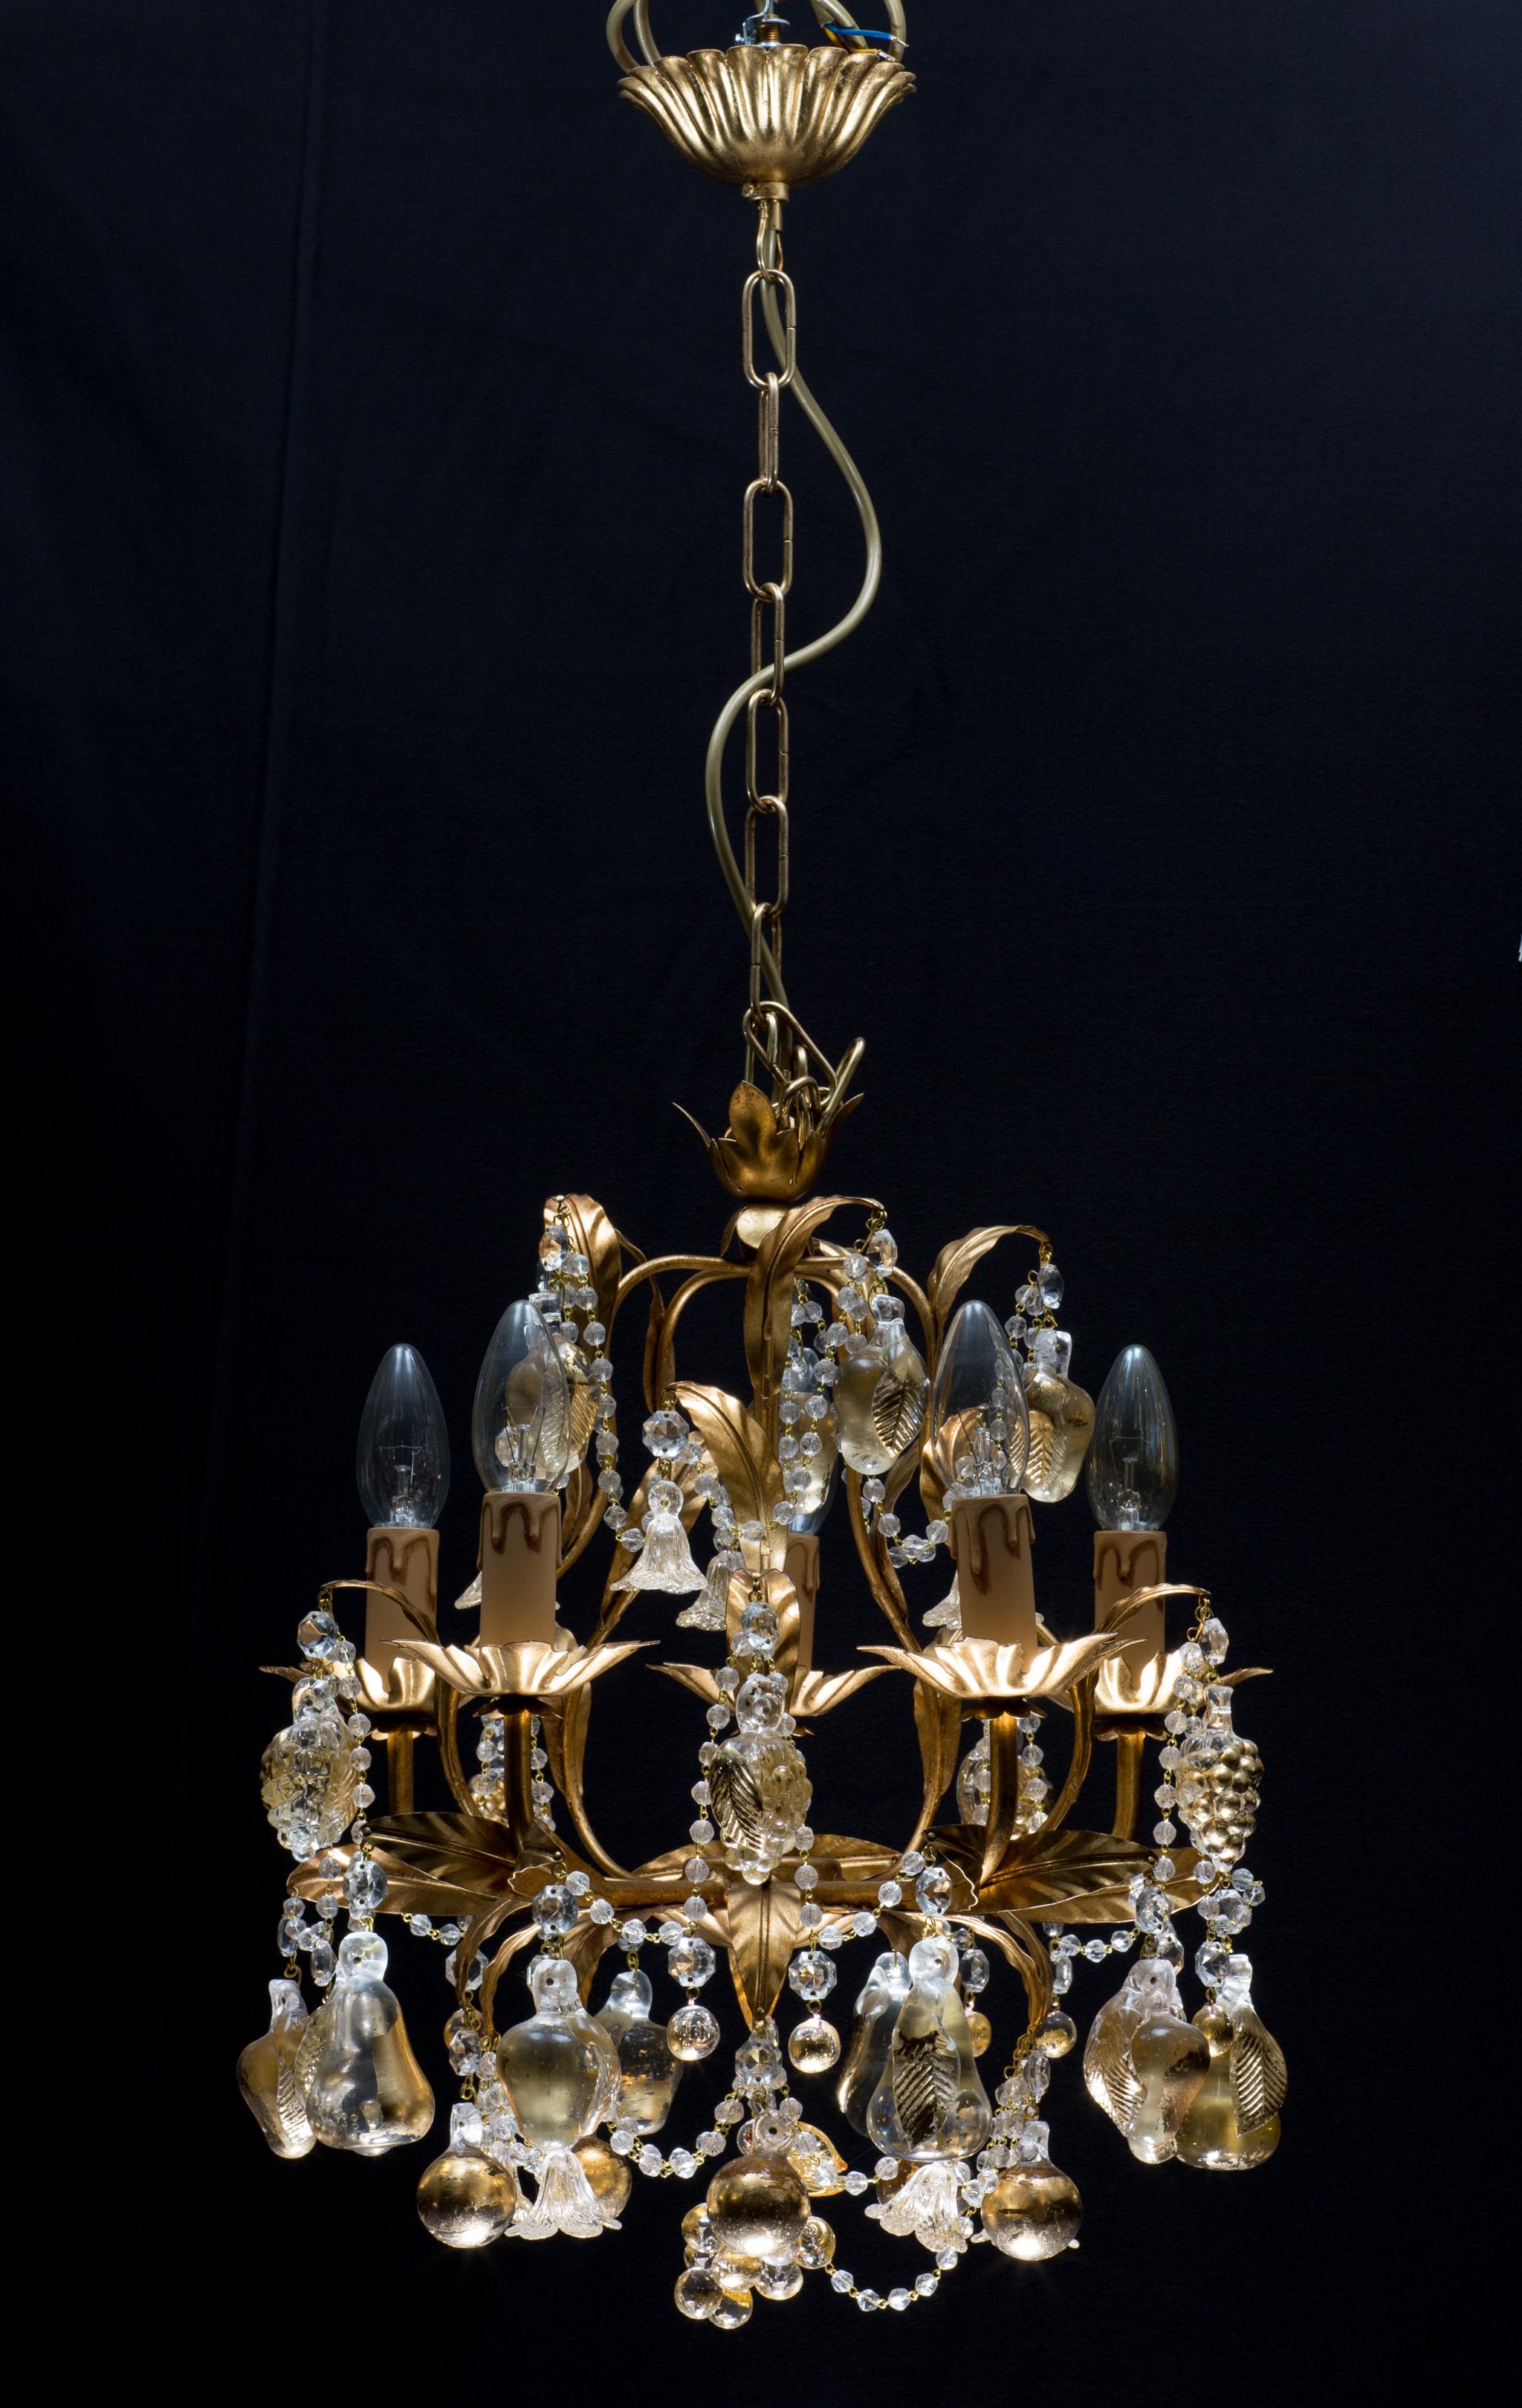 21st century Italian Venetian chandelier with 24-karat gold embedded Murano glass. Handcrafted in Venetia.
The whole chandelier is embedded with 24-karat gold. This exquisite piece is ornamented with golden leaves   
and dangling handmade glass